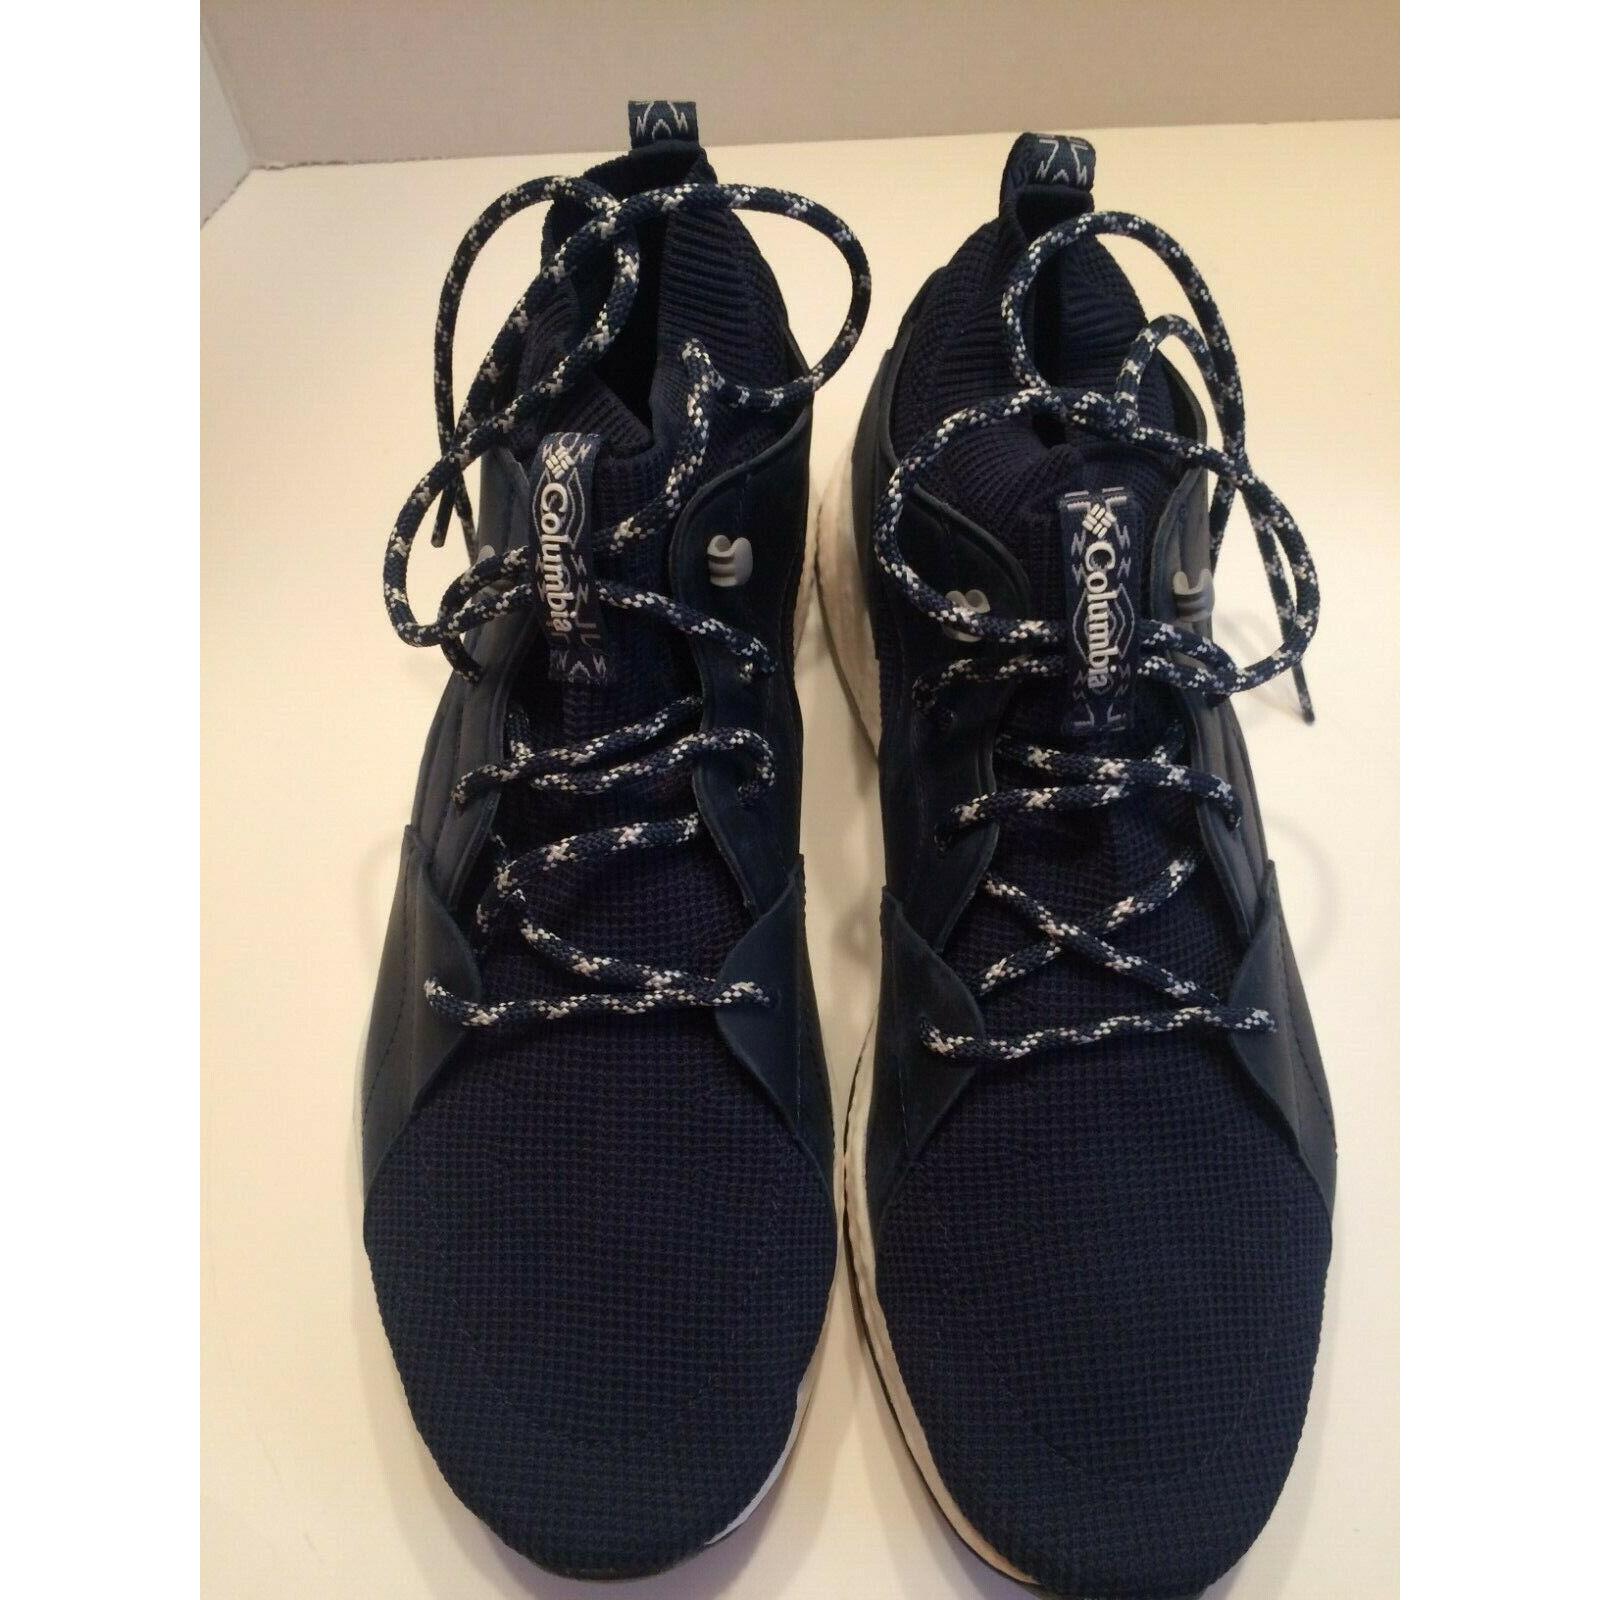 Columbia Sh/ft Mid Men Waterproof Leather Shoes Navy Blue Size 12